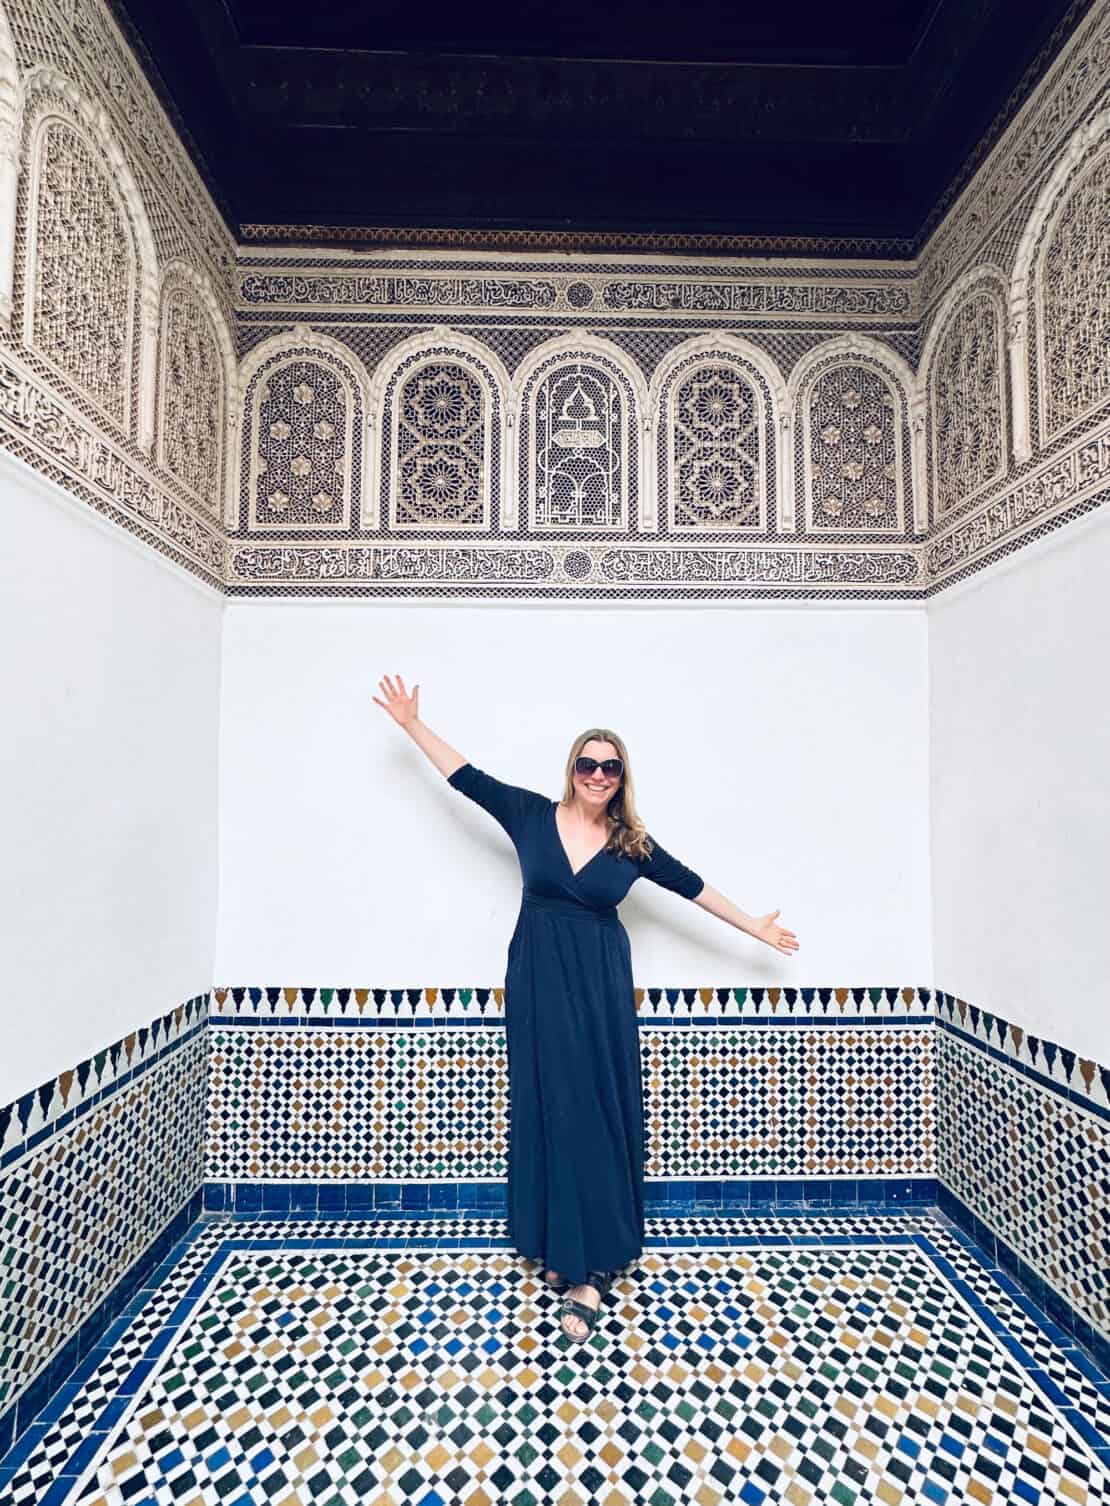 Abigail King at Bahia Palace on a tour in Marrakech Morocco